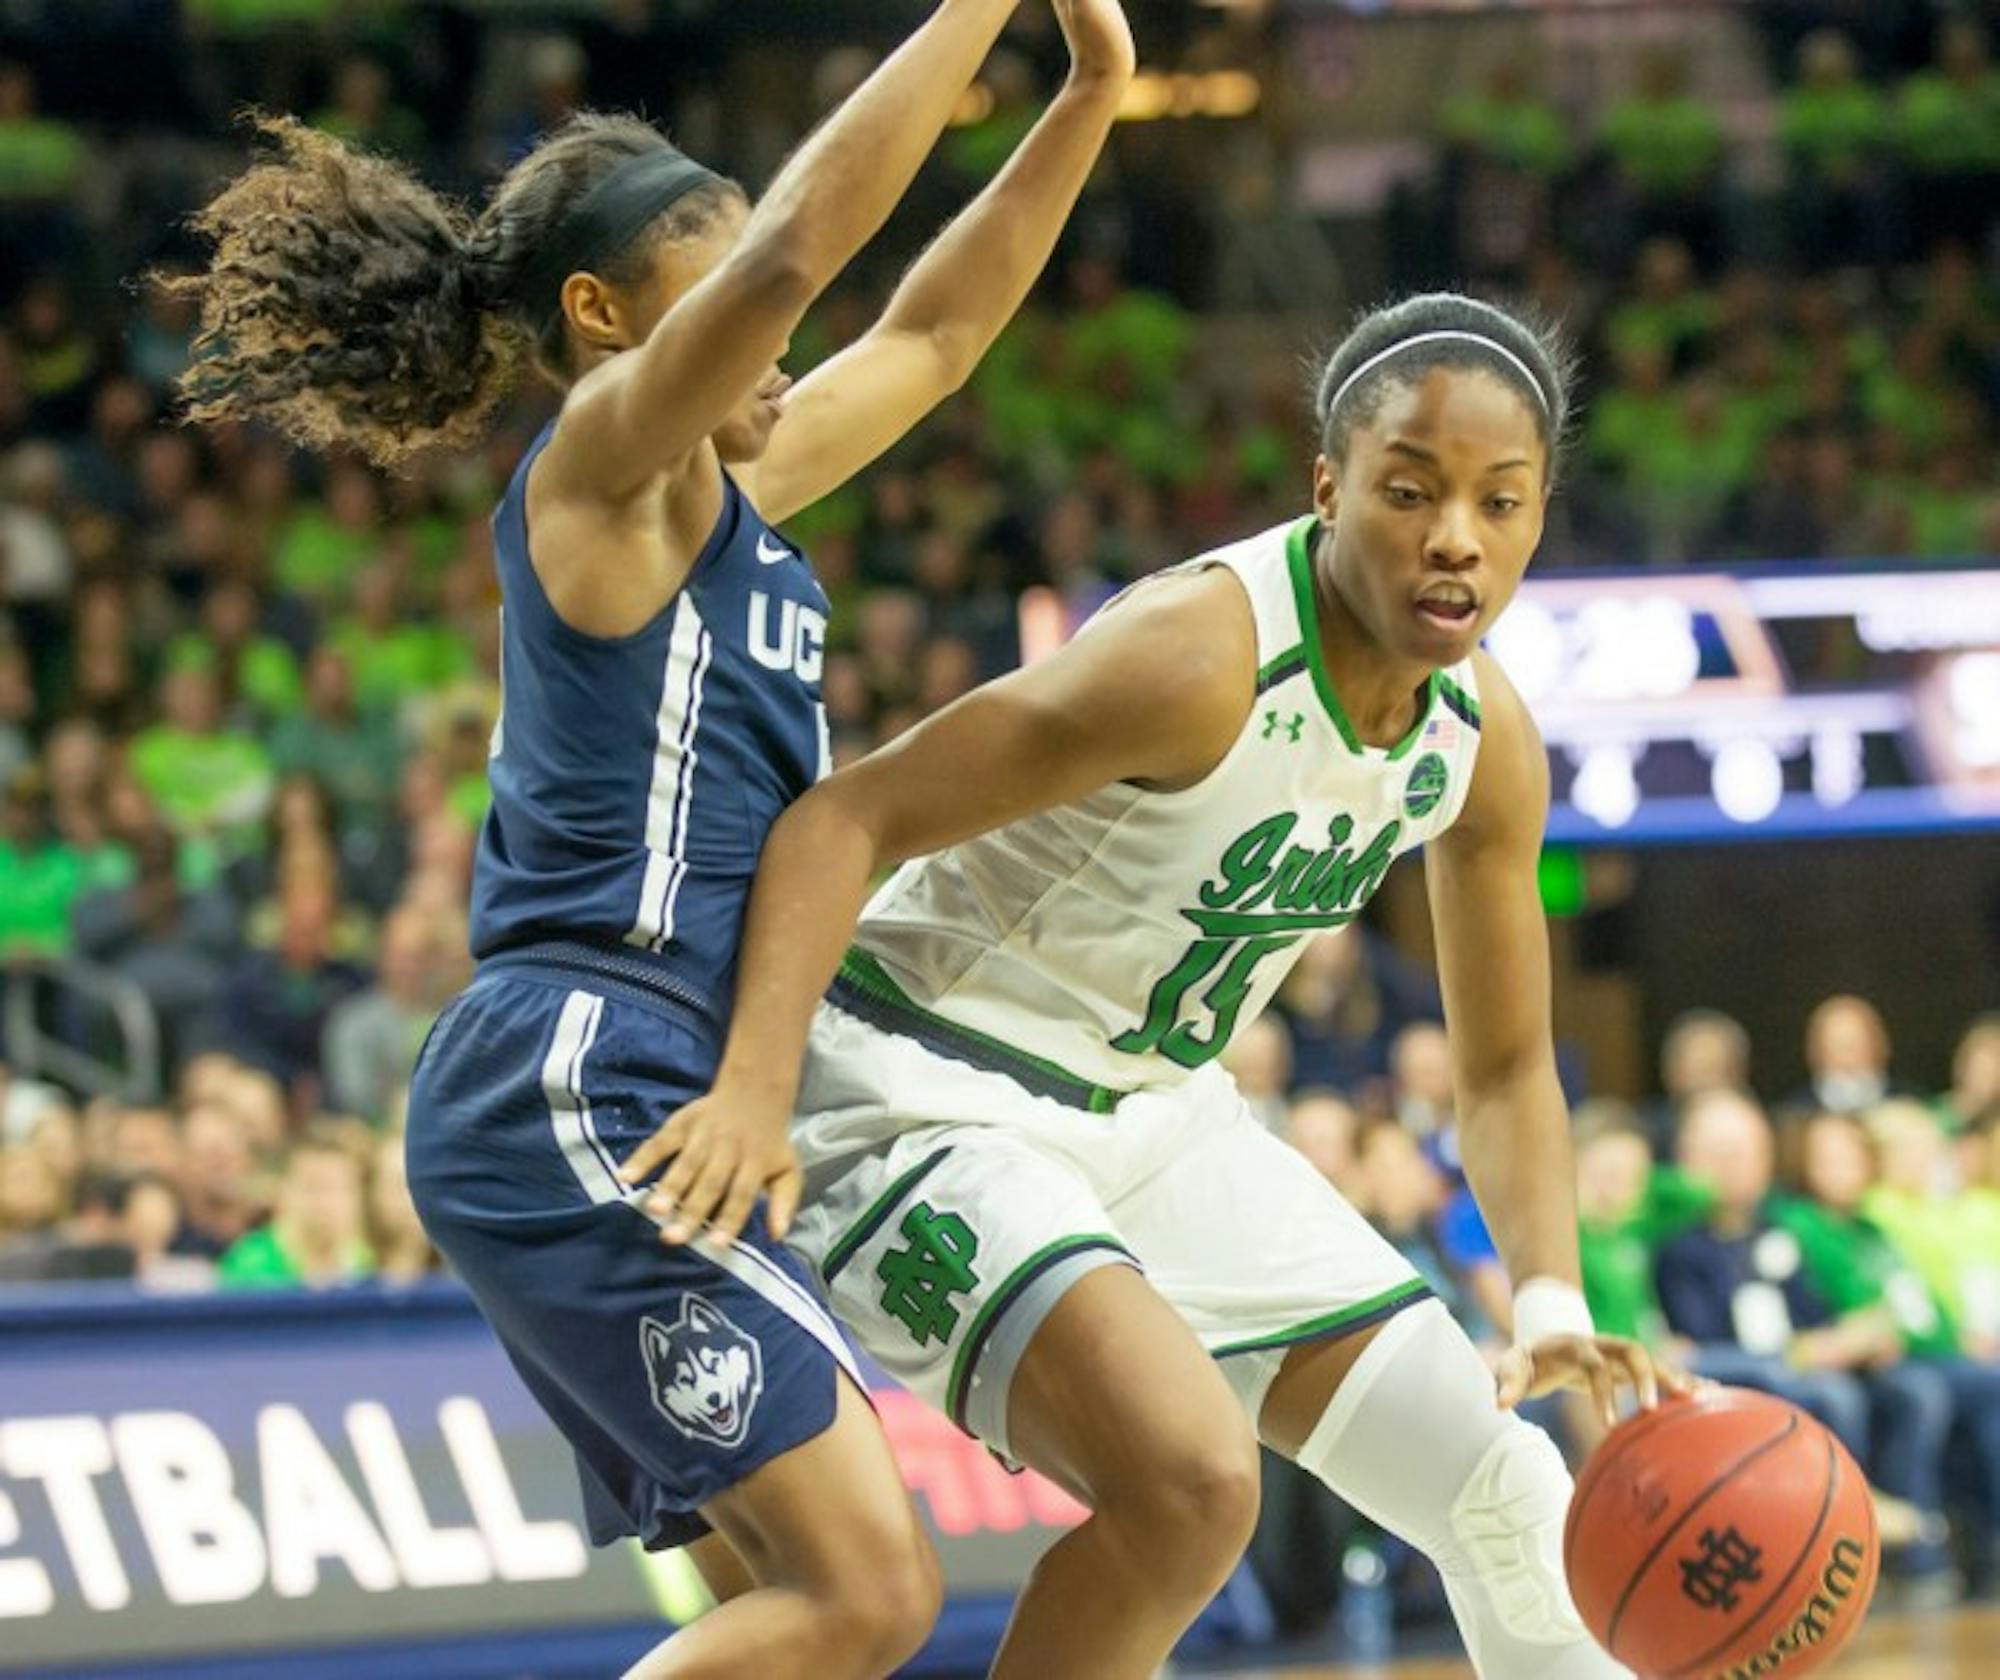 Irish senior guard Lindsay Allen dribbles around a defender in Notre Dame's 72-61 loss to the Huskies on Wednesday.